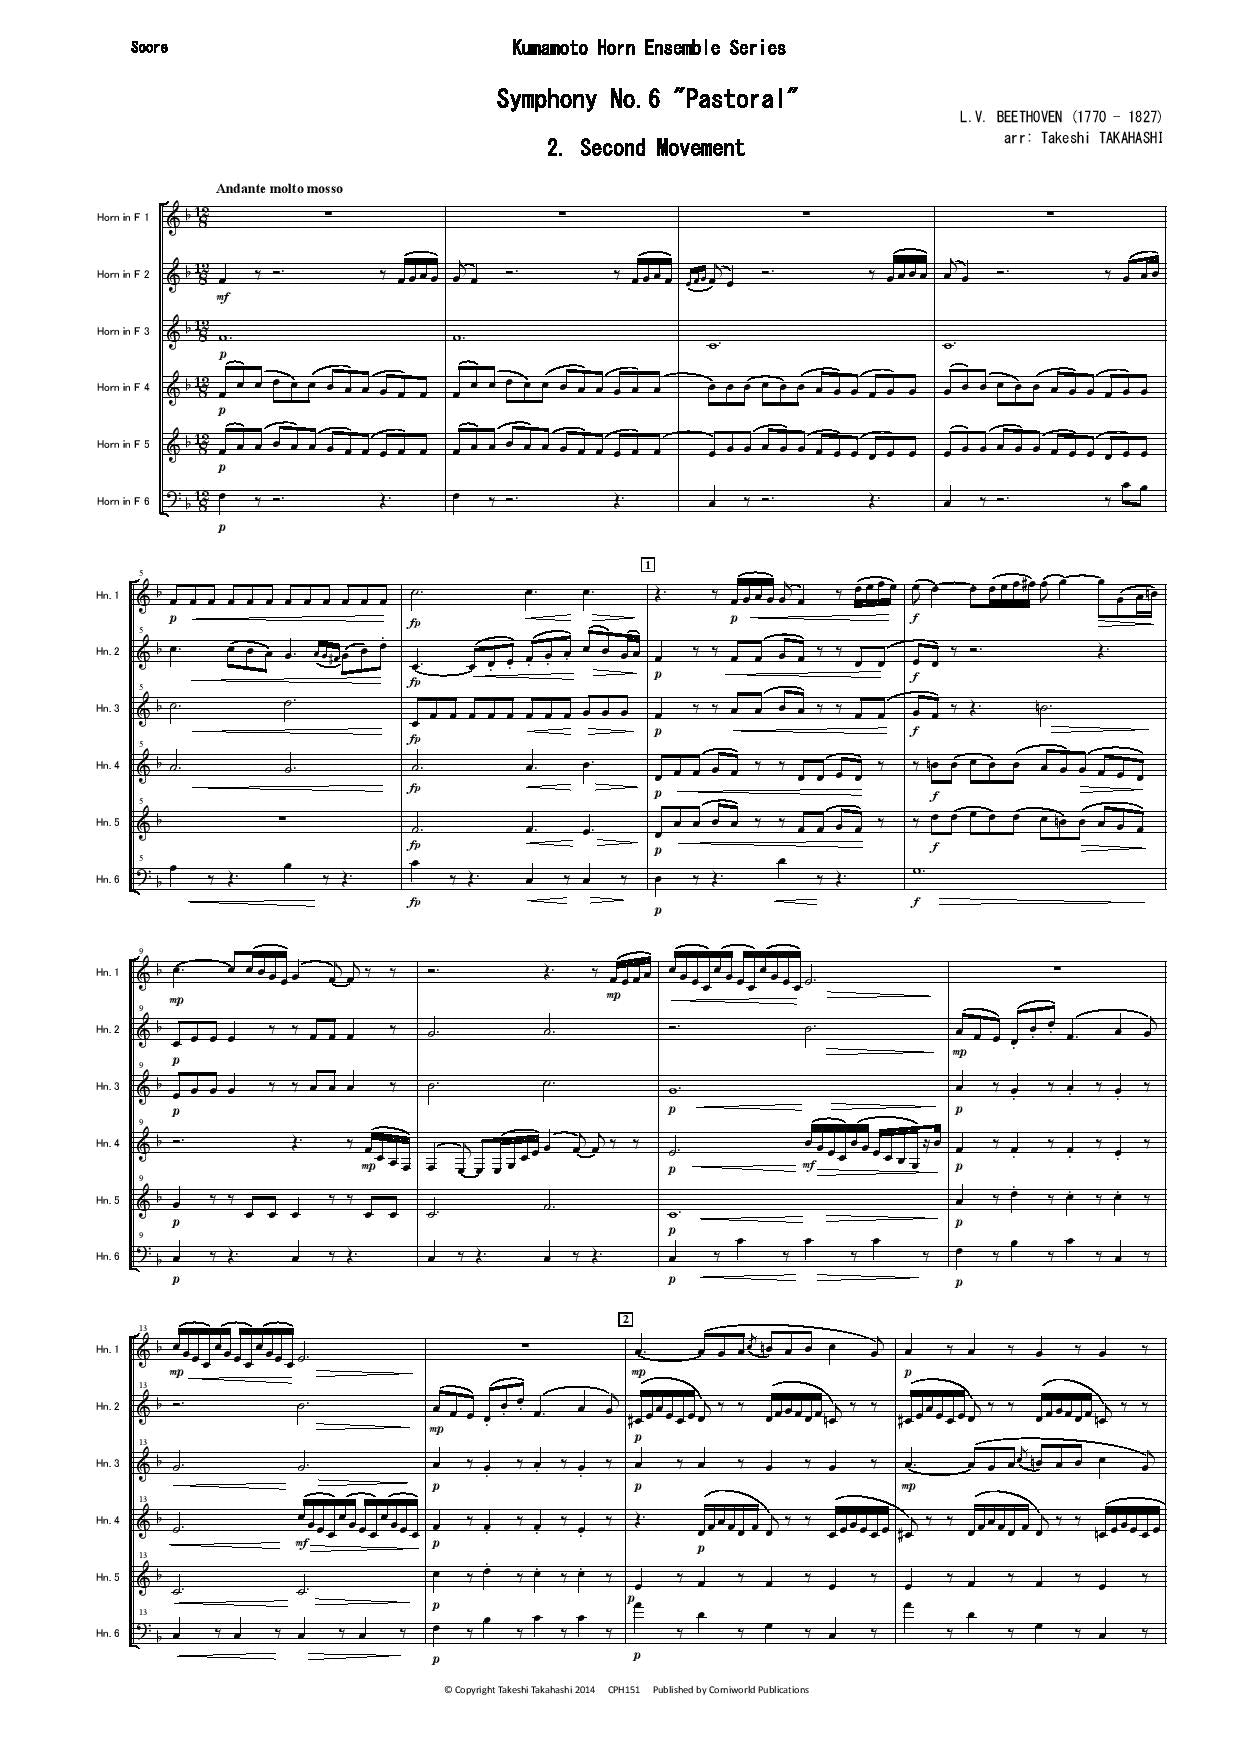 2nd Mvt from Symphony No.6 Pastoral (Beethoven) CPH151